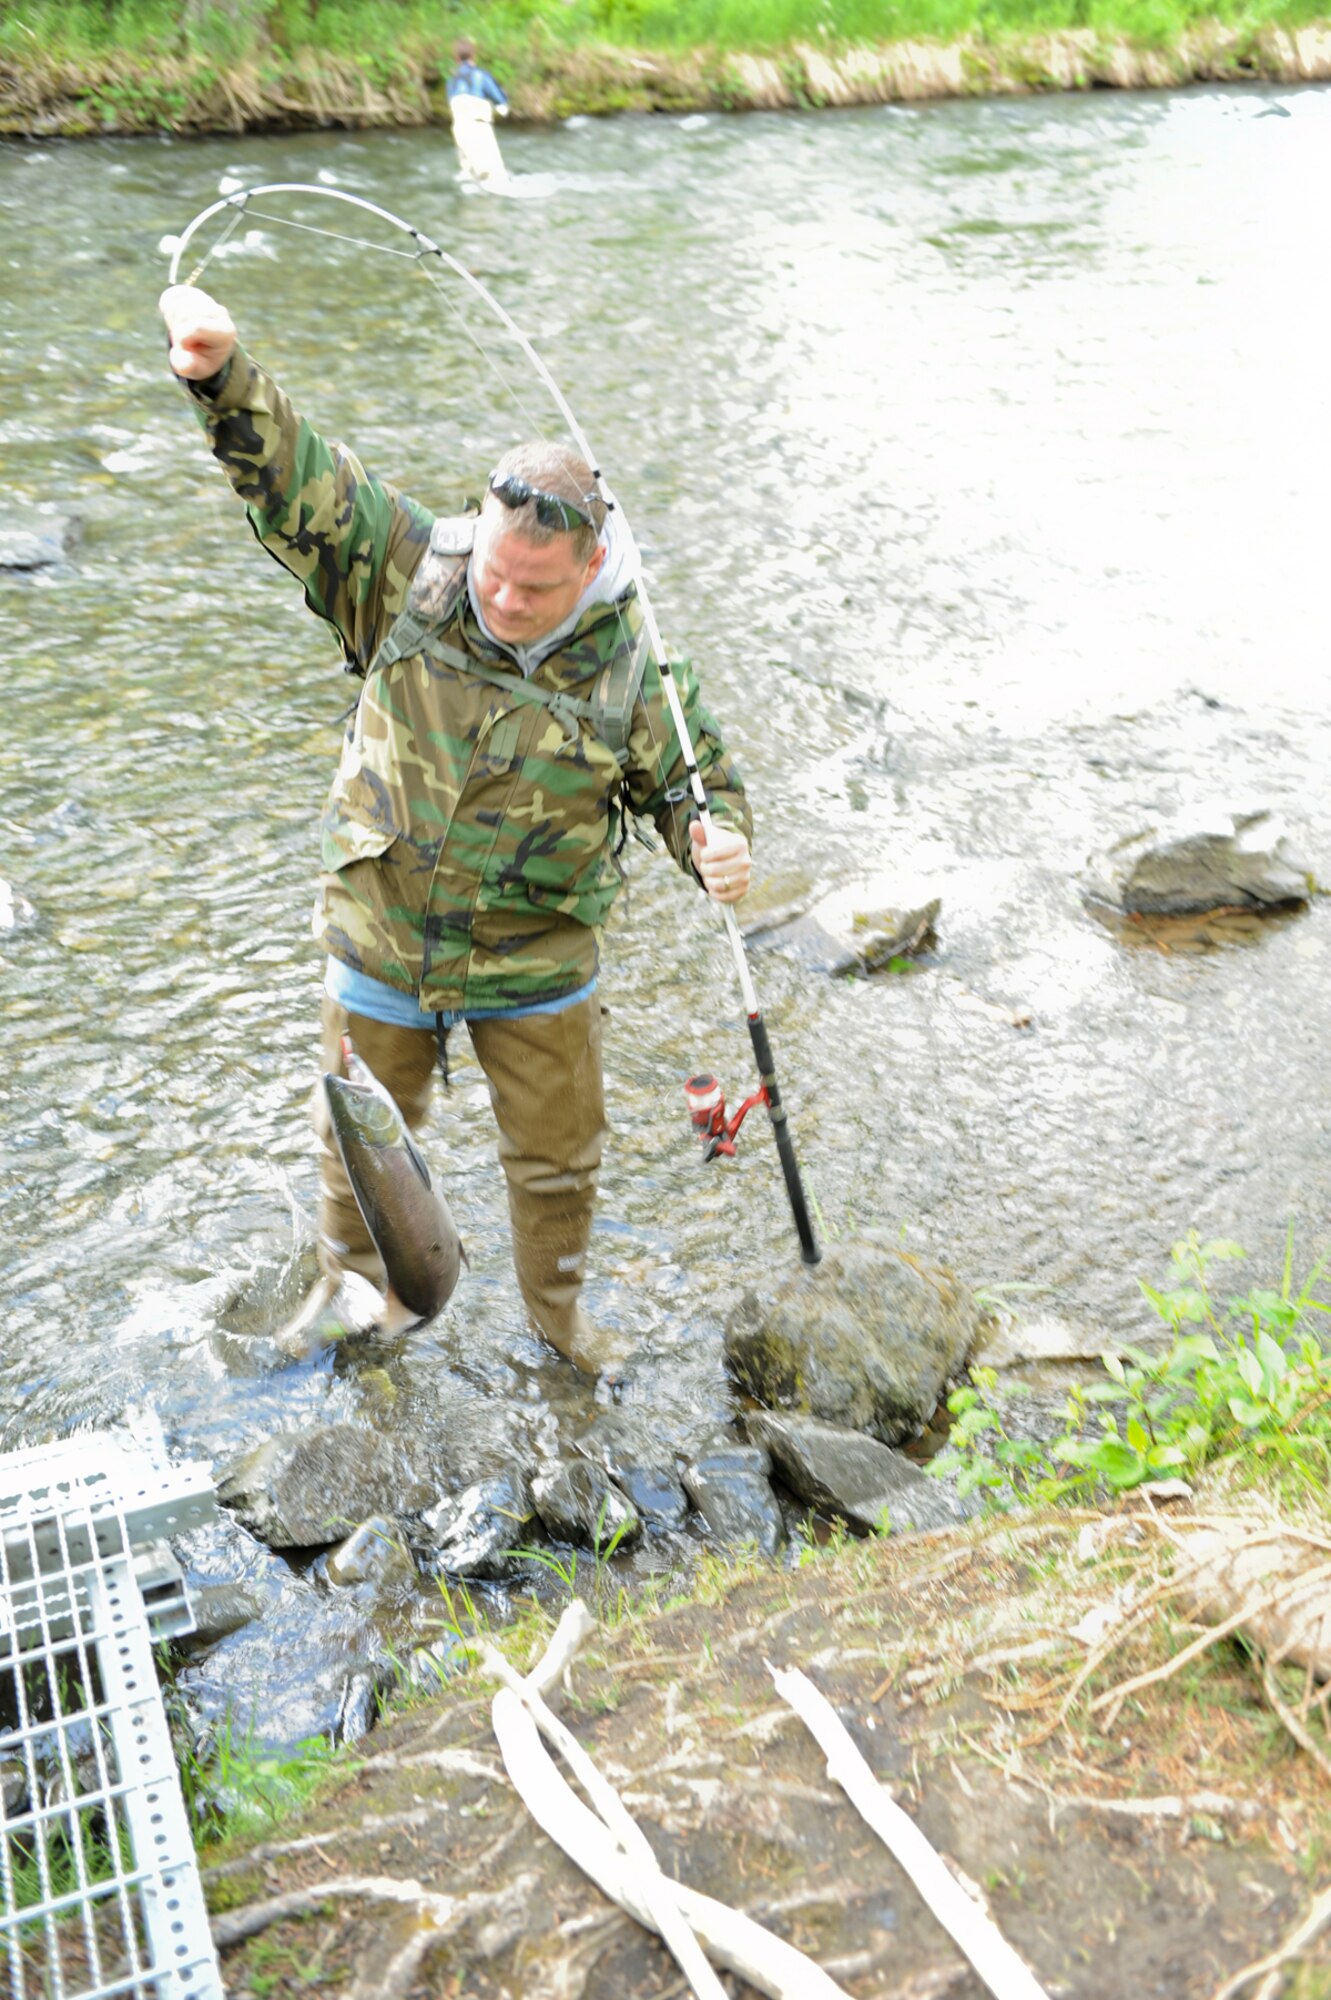 Air Force Master Sgt. Michael Hapgood, on temporary duty at Joint Base Elmendorf-Richardson from the 72nd Aerial Port Squadron at Tinker Air Force Base, Okla., brings in a red salmon June 27. Hapgood participated in the 673d Force Support Squadron/Morale Welfare and Recreation fi shing trip to the Russian River, near Cooper Landing, Alaska, on the Kenai Peninsula. (U.S. Air Force photo/Steve White)